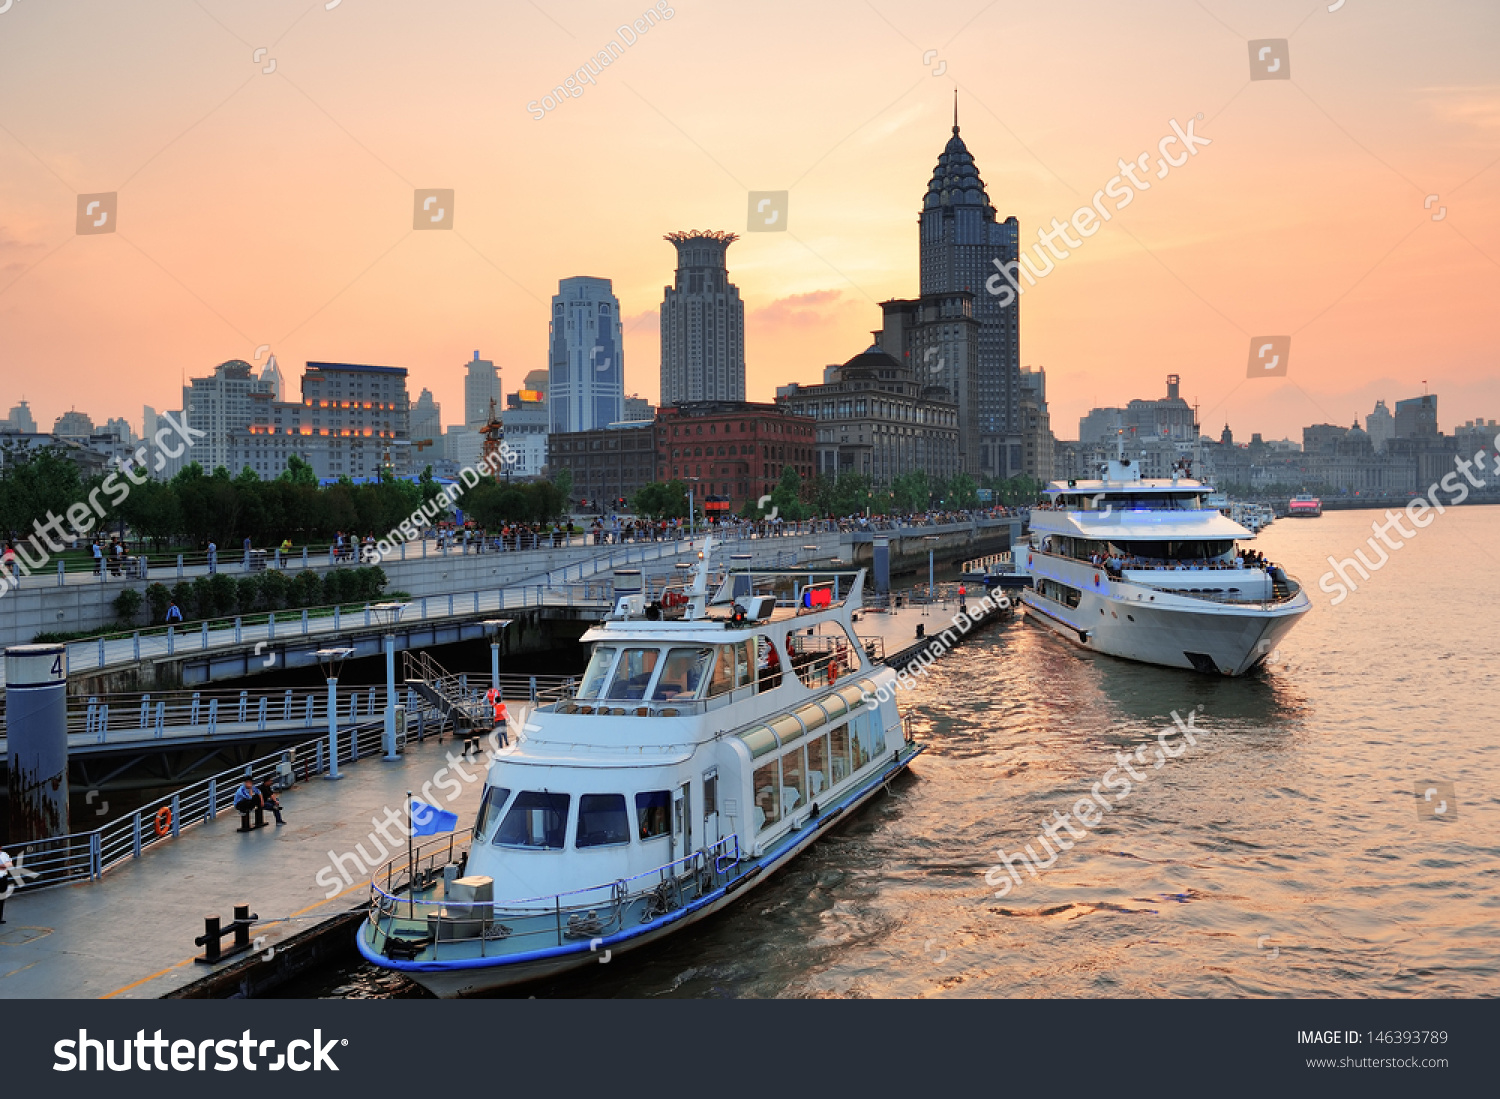 Boat in Huangpu River with Shanghai urban architecture at sunset in dock #146393789